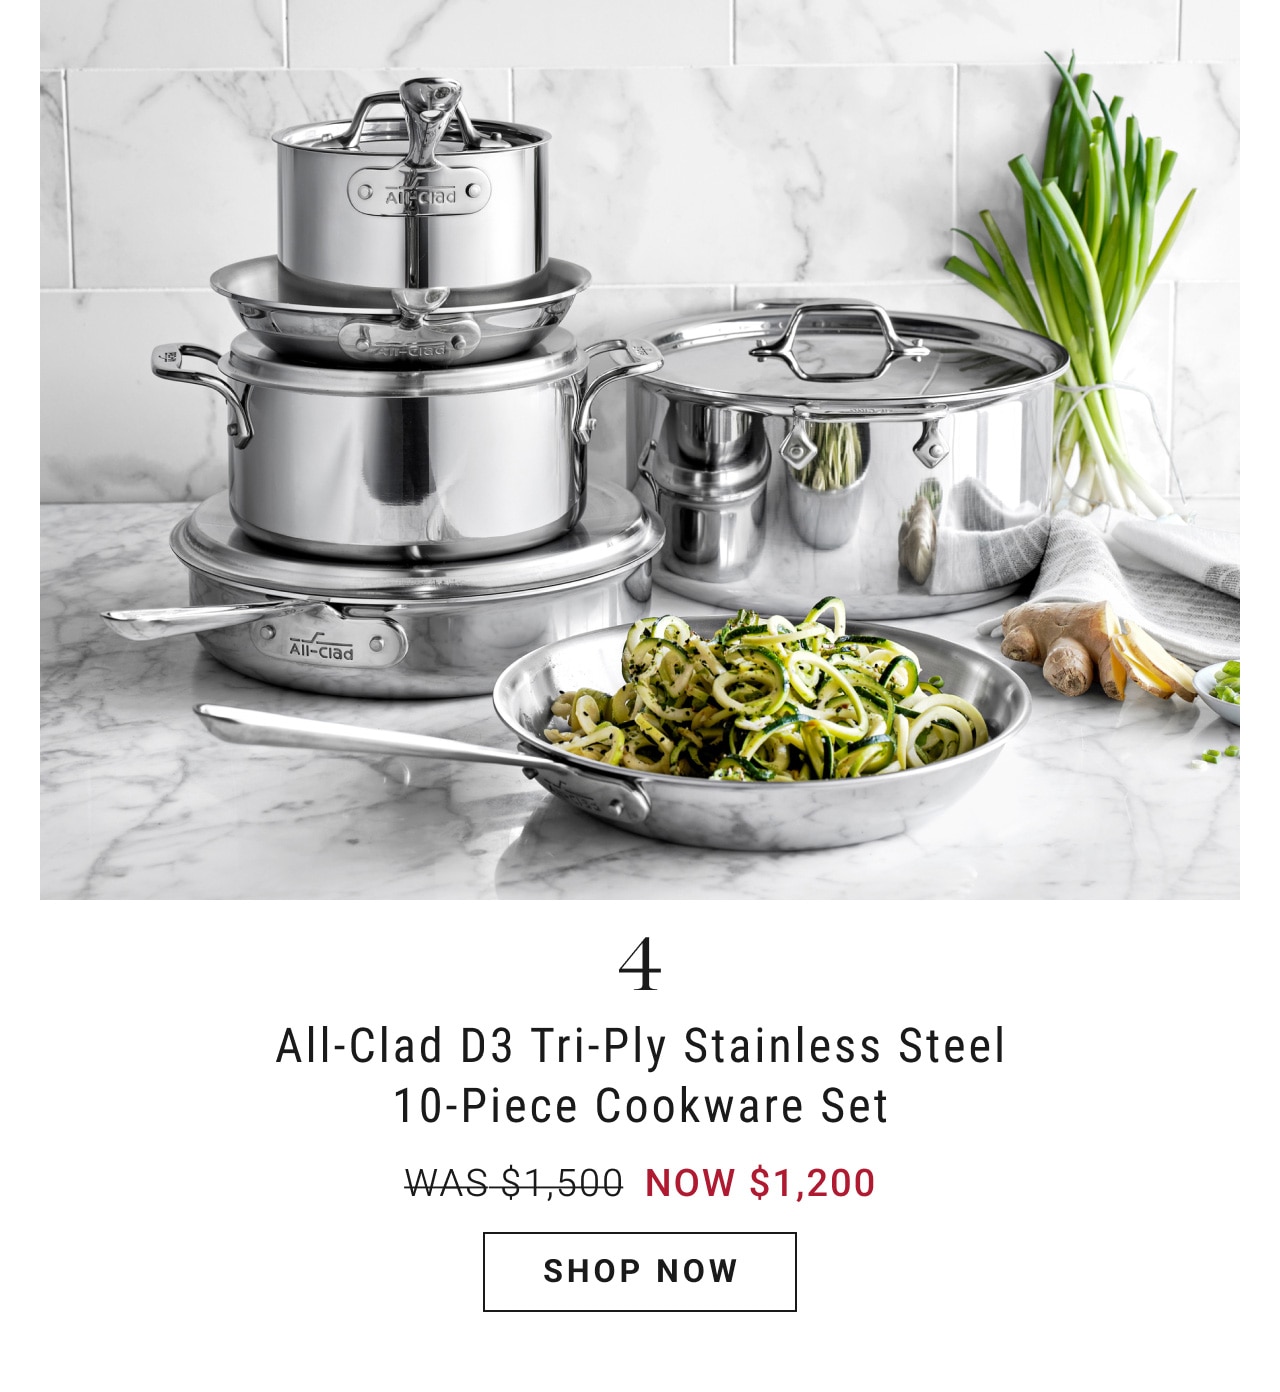  All-Clad D3 Tri-Ply Stainless Steel 10-Piece Cookware Set WAS-$1.500 NOW $1,200 SHOP NOW 